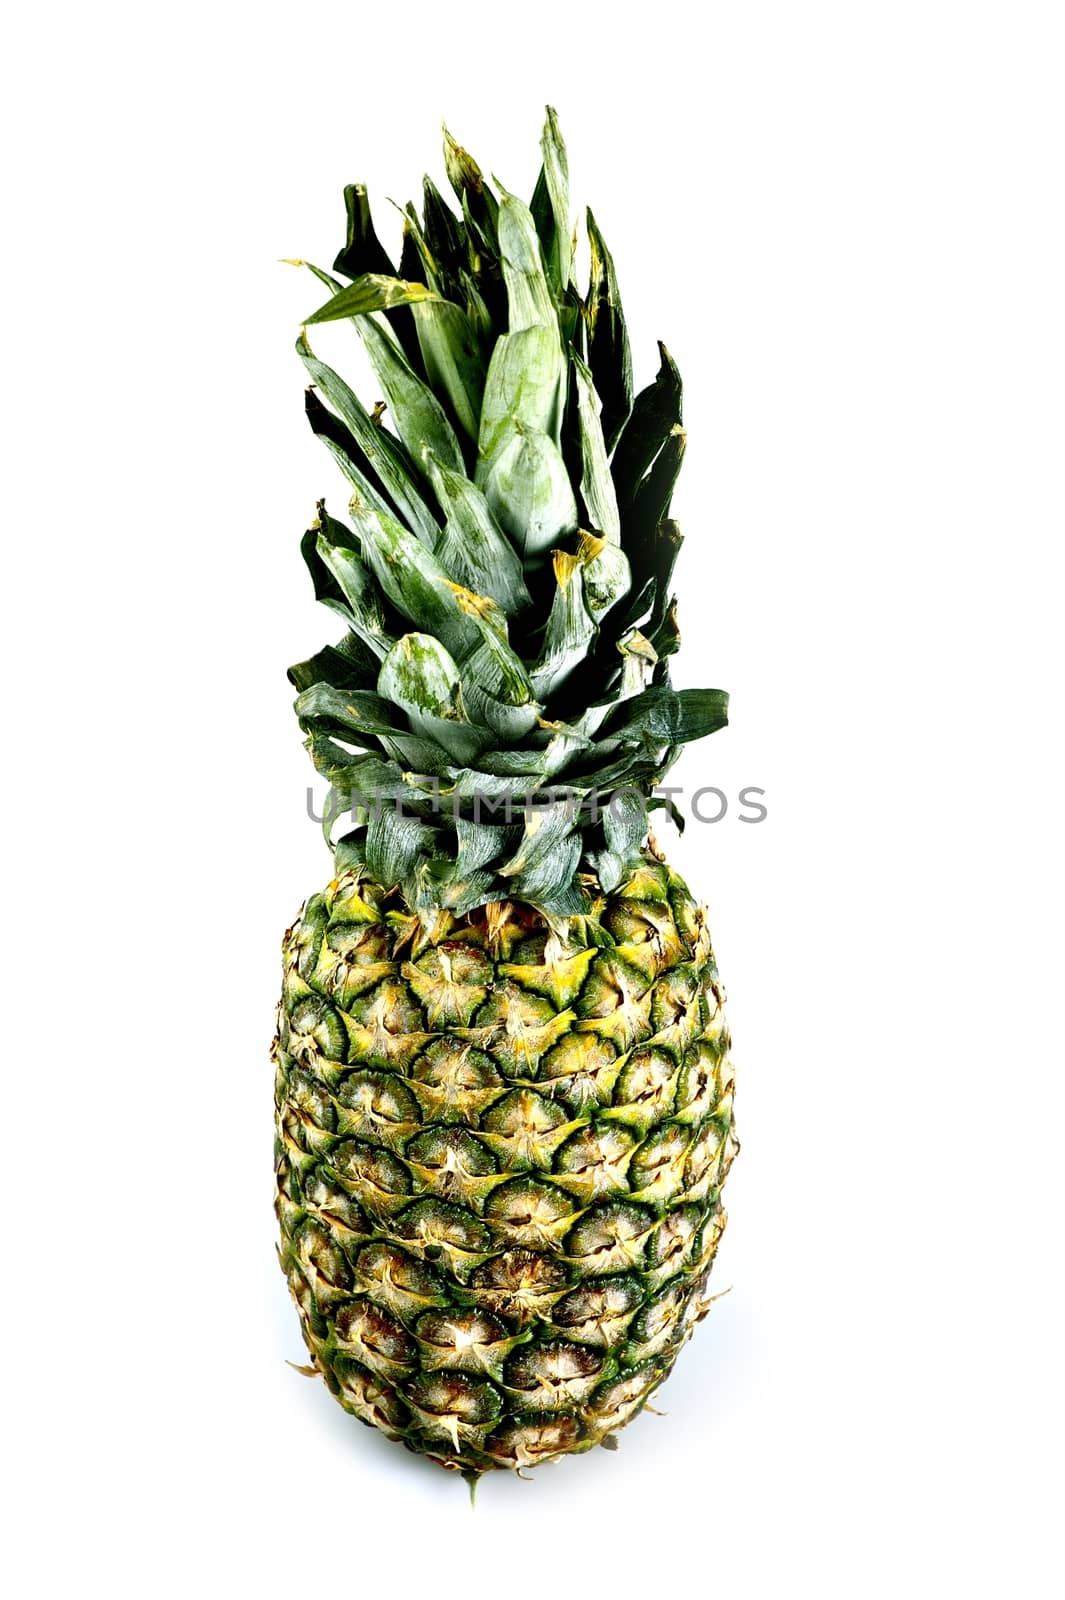 PIneapple Vertical Photo. Pineapple Isolated on White.